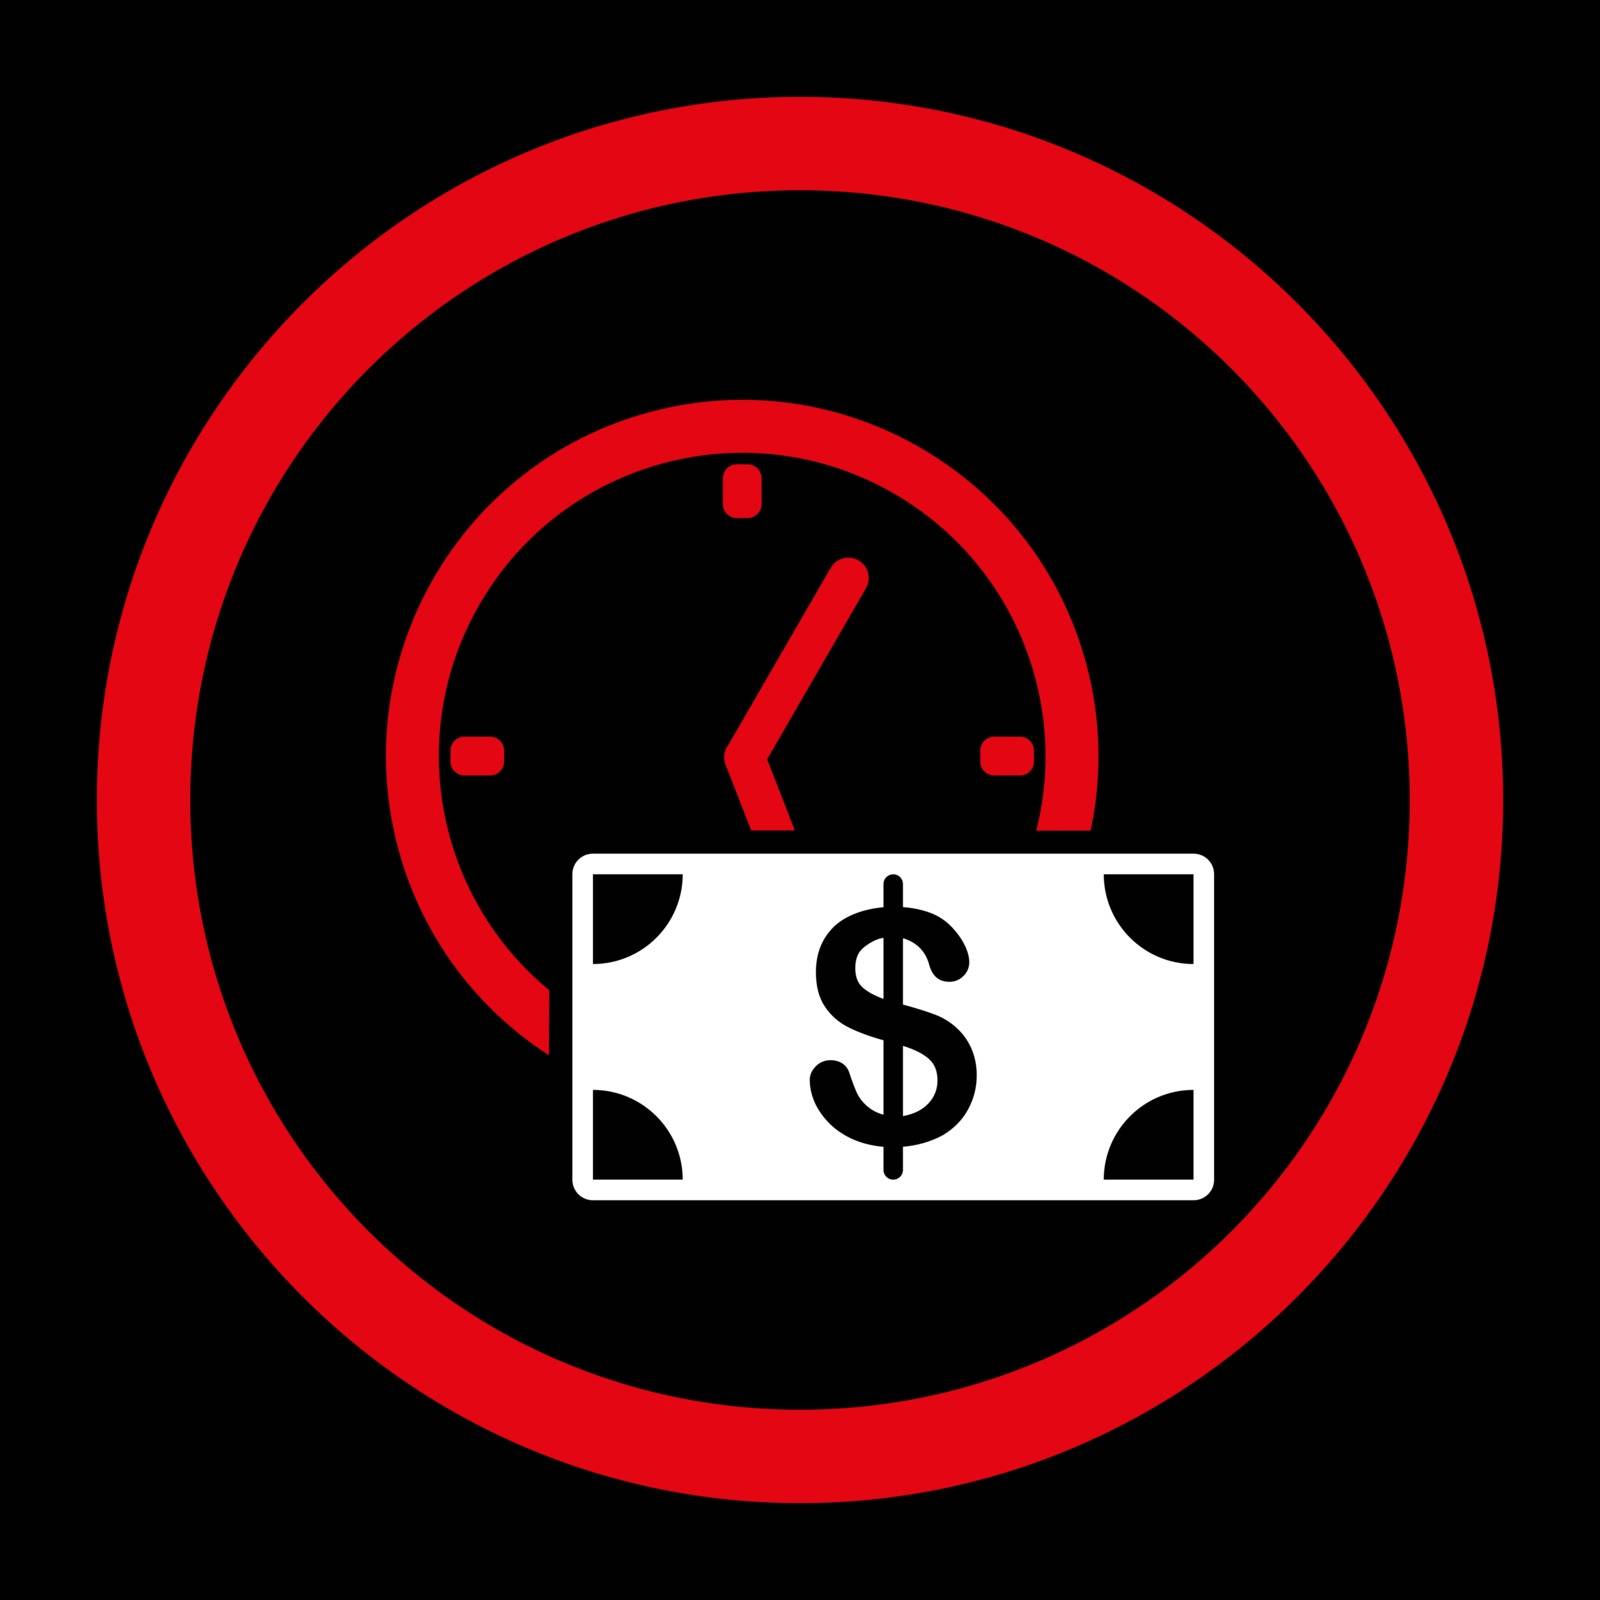 Credit vector icon. This flat rounded symbol uses red and white colors and isolated on a black background.